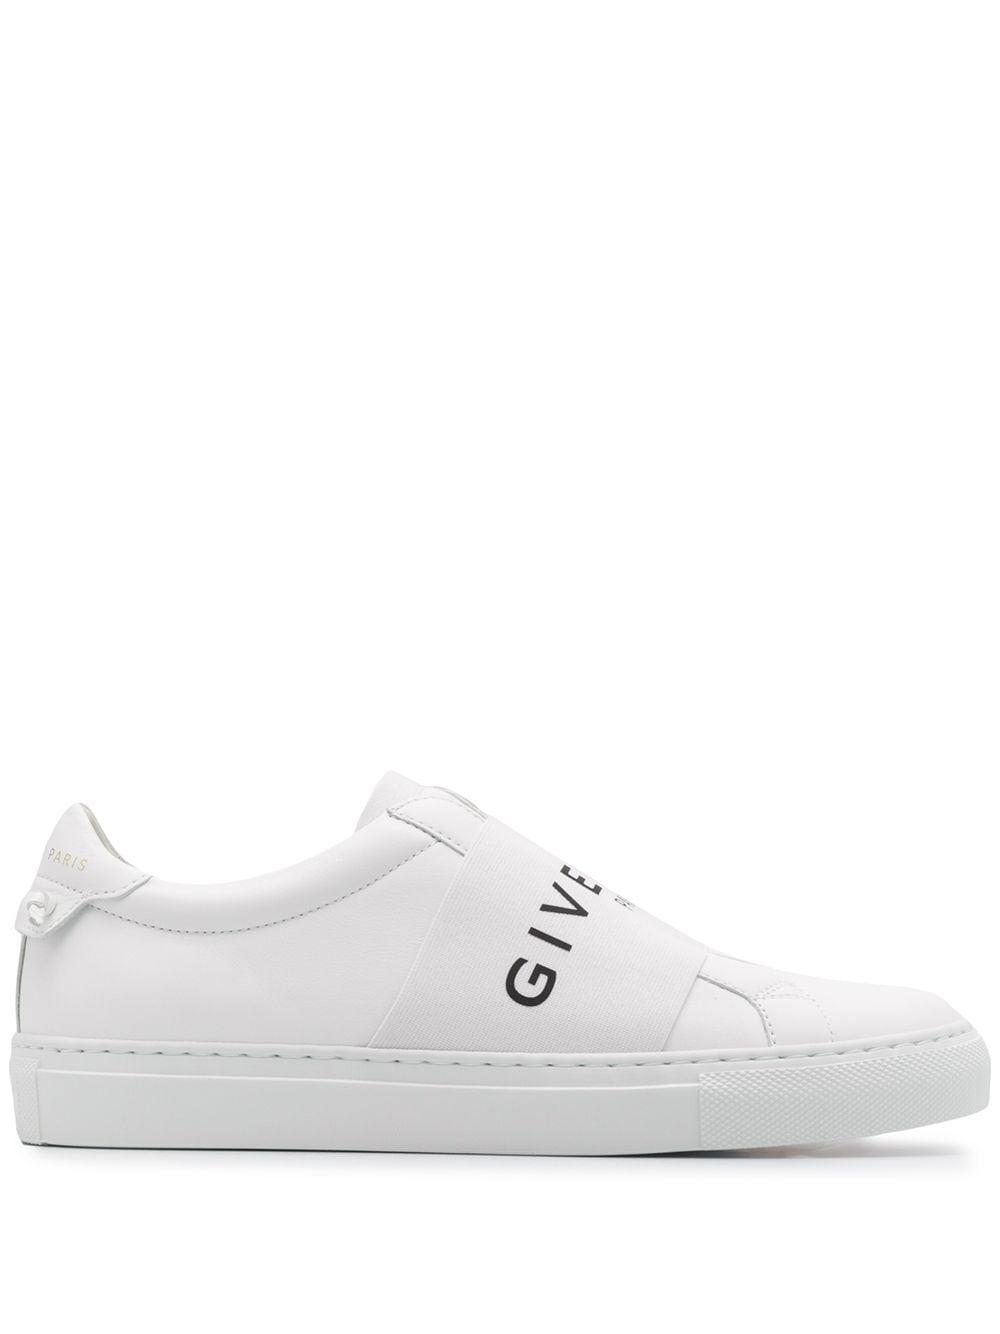 Givenchy Leather Sneakers White - Save 30% | Lyst